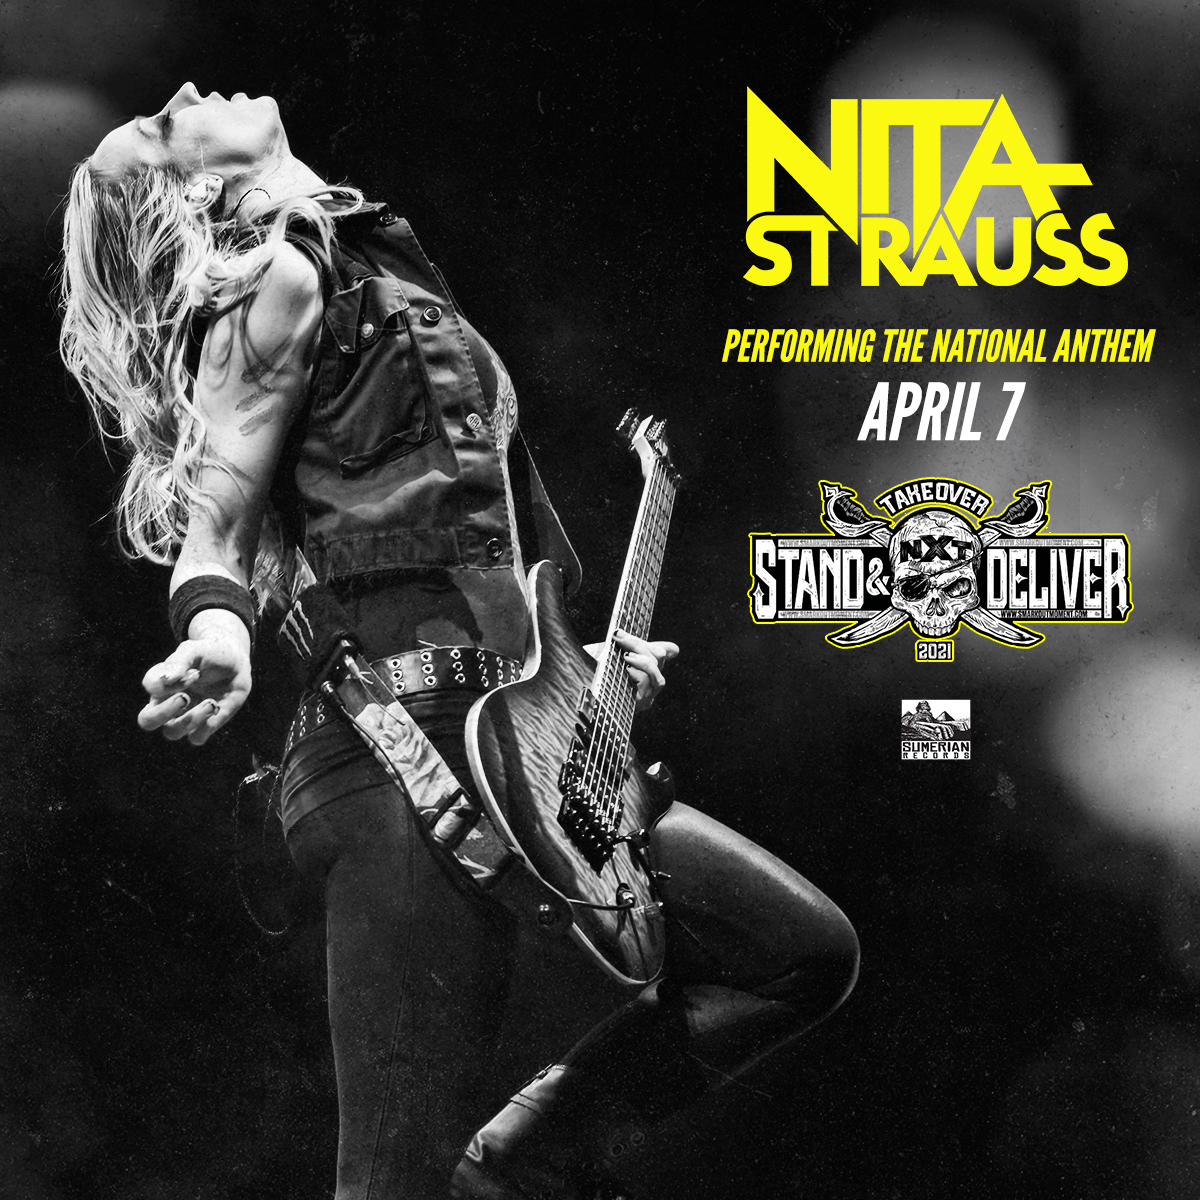 Nita Strauss to Perform National Anthem on NXT Takeover 'Stand & Deliver' Tonight (4/7)